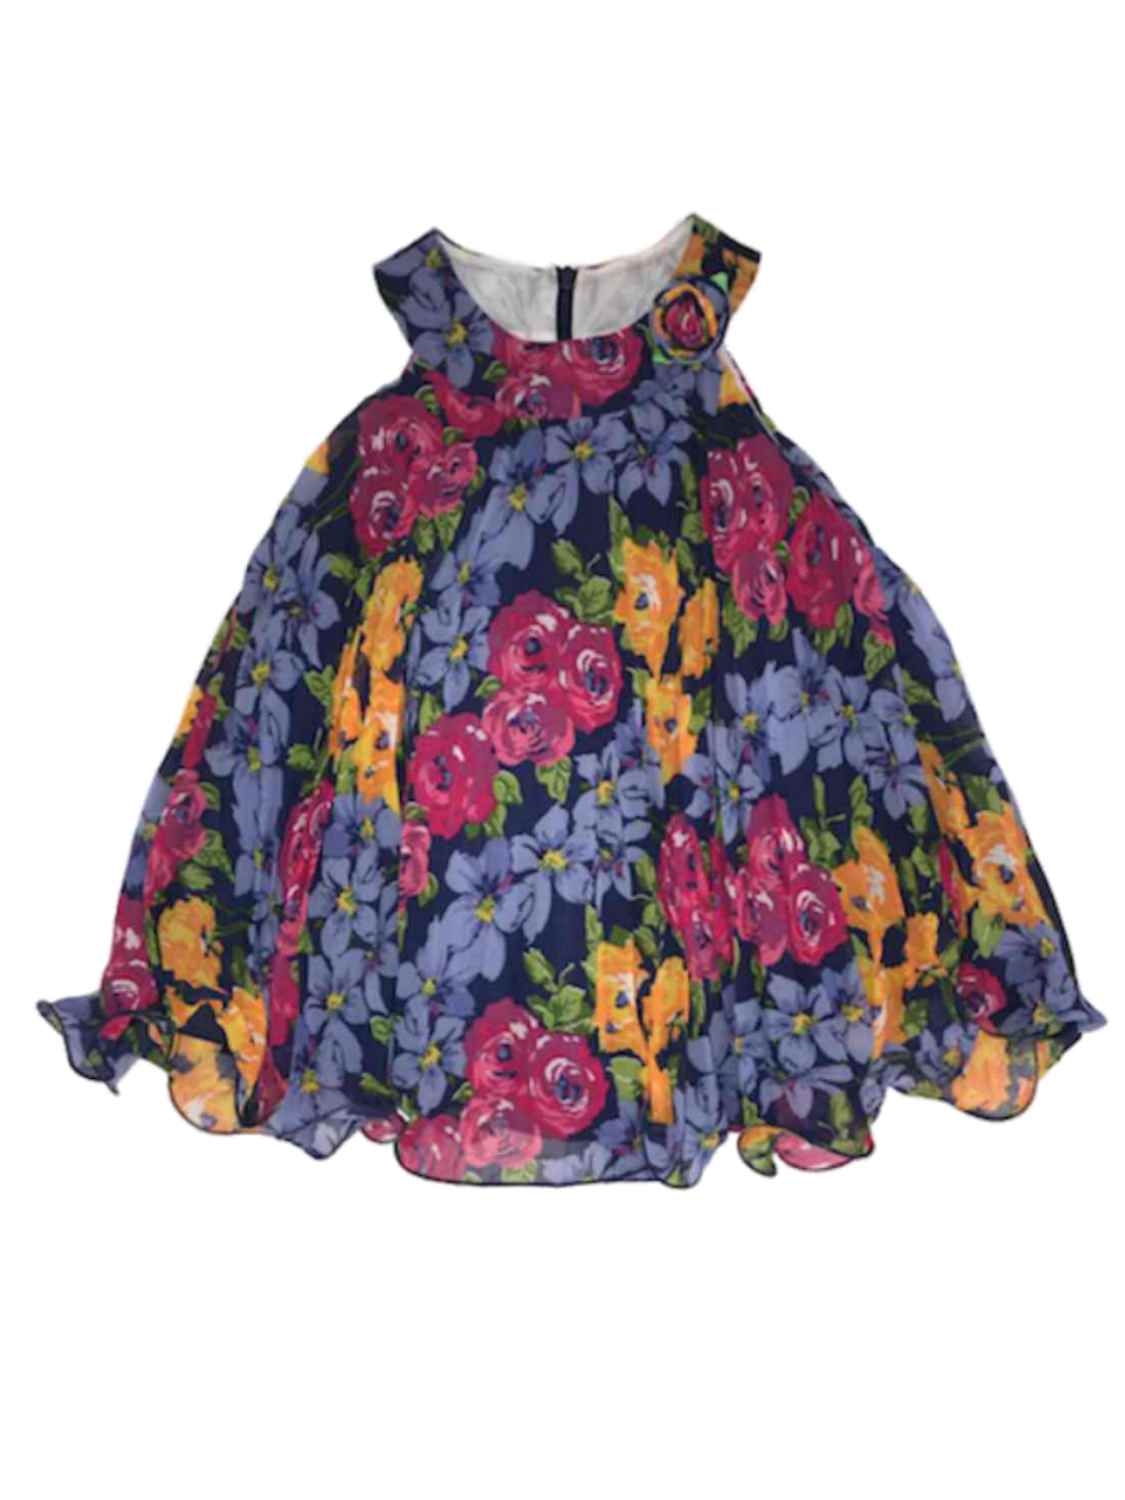 American Princess Infant Girls Navy Blue Colorful Flowers Floral Pleated Bell Baby Dress